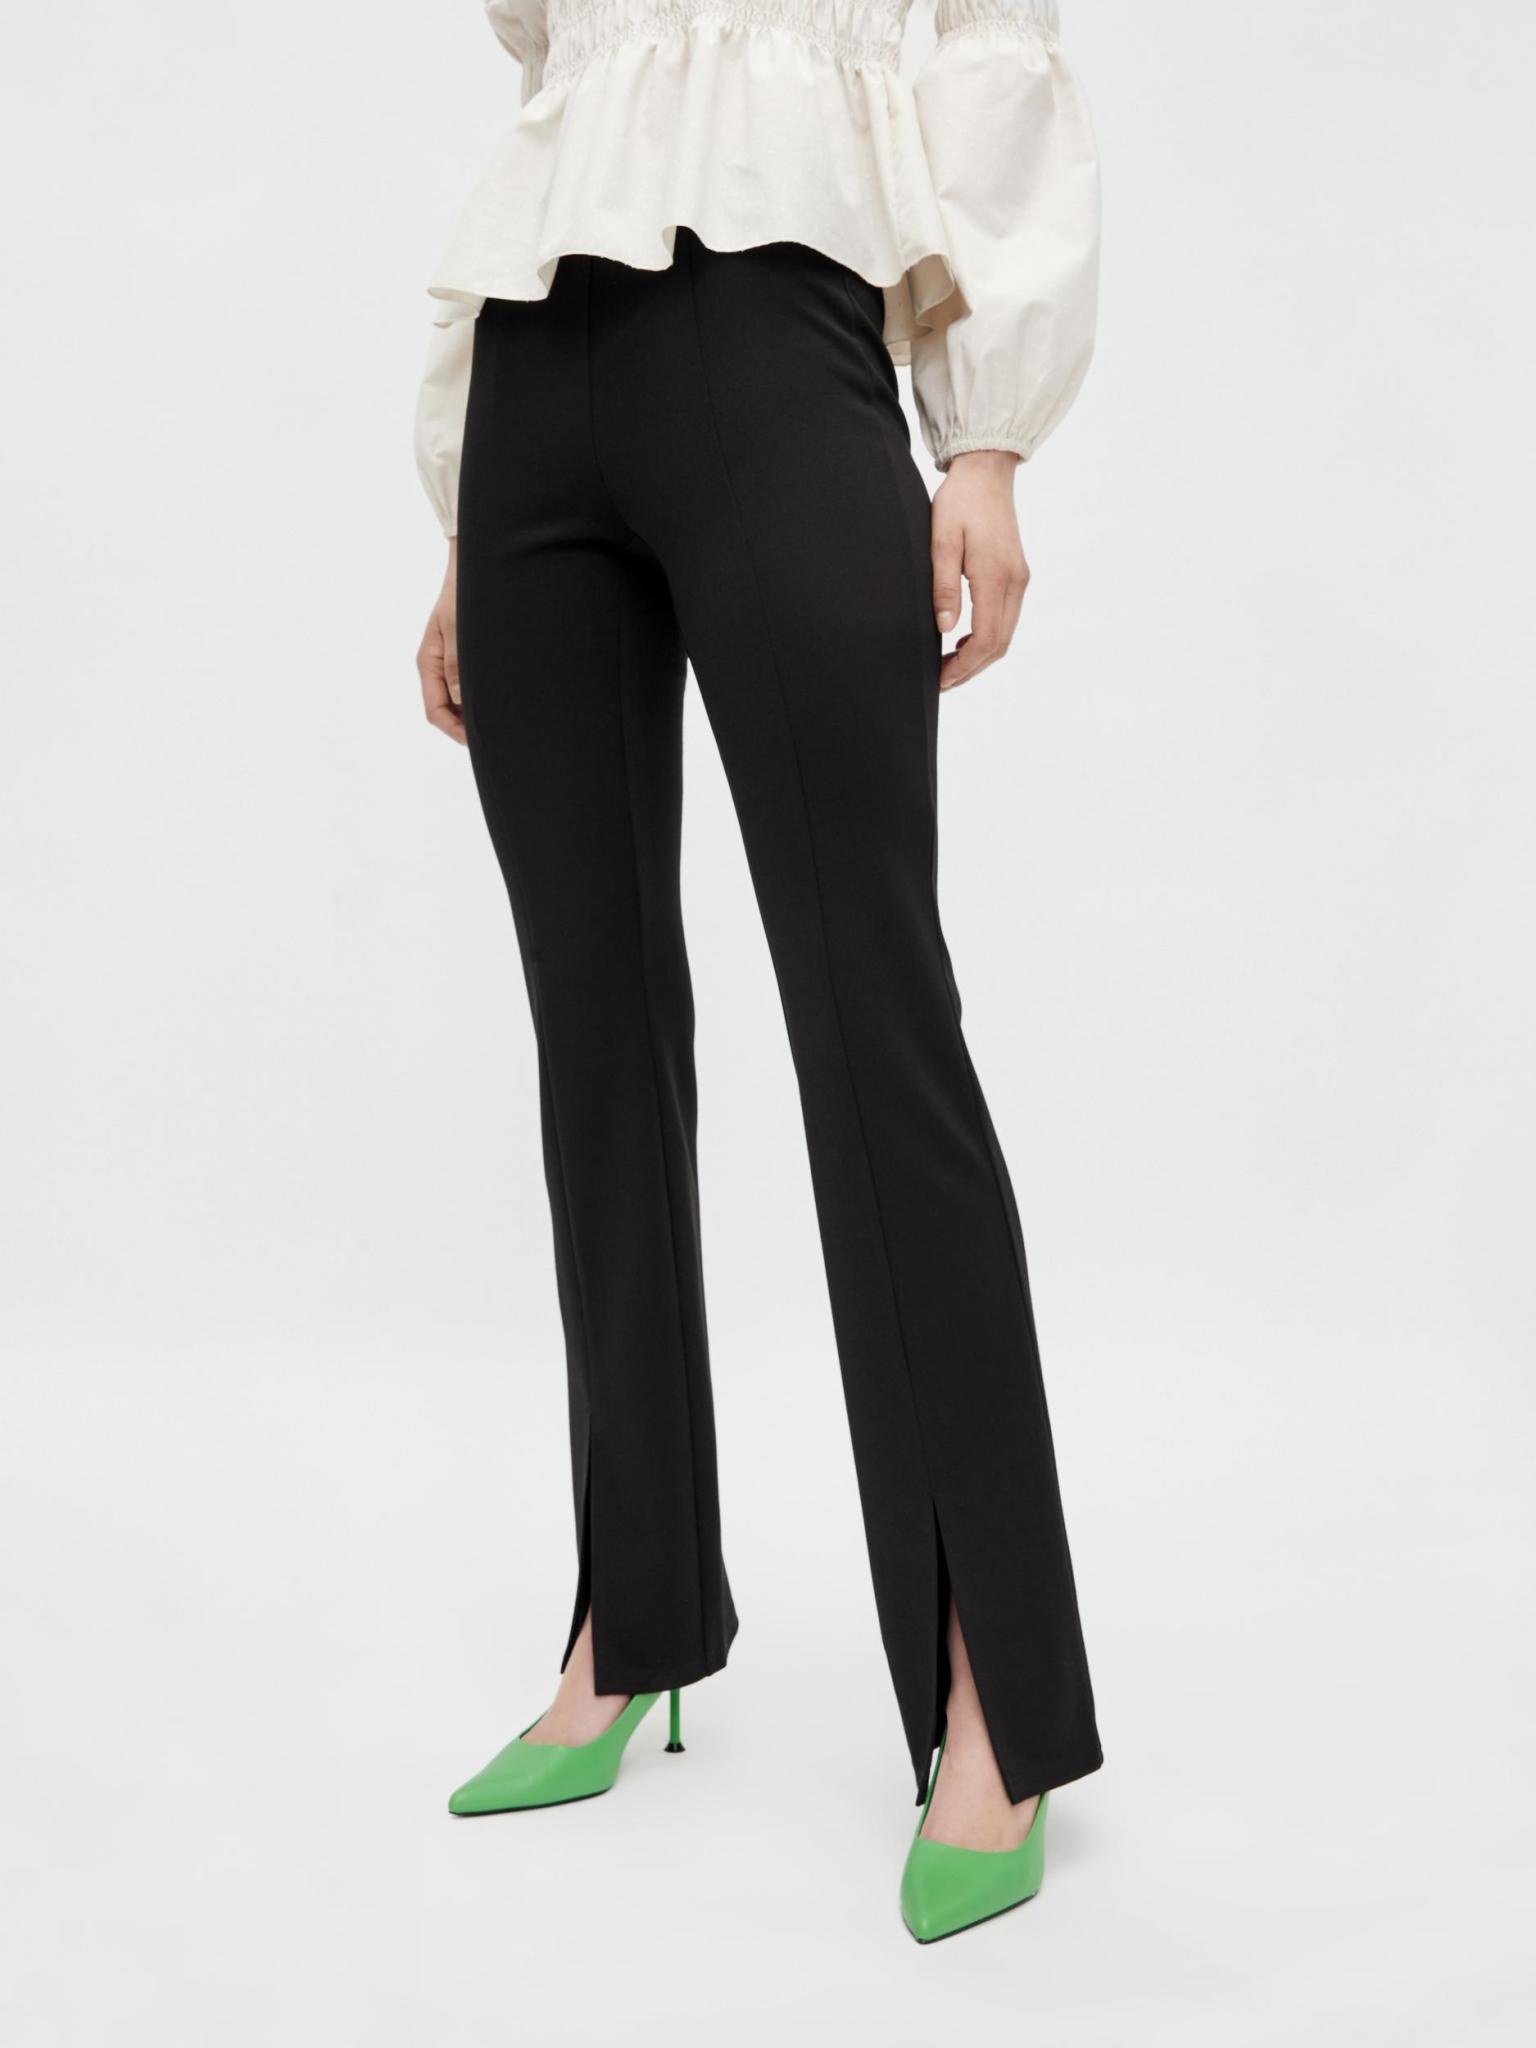 Only Only : Paige Front Slit Pants 30"